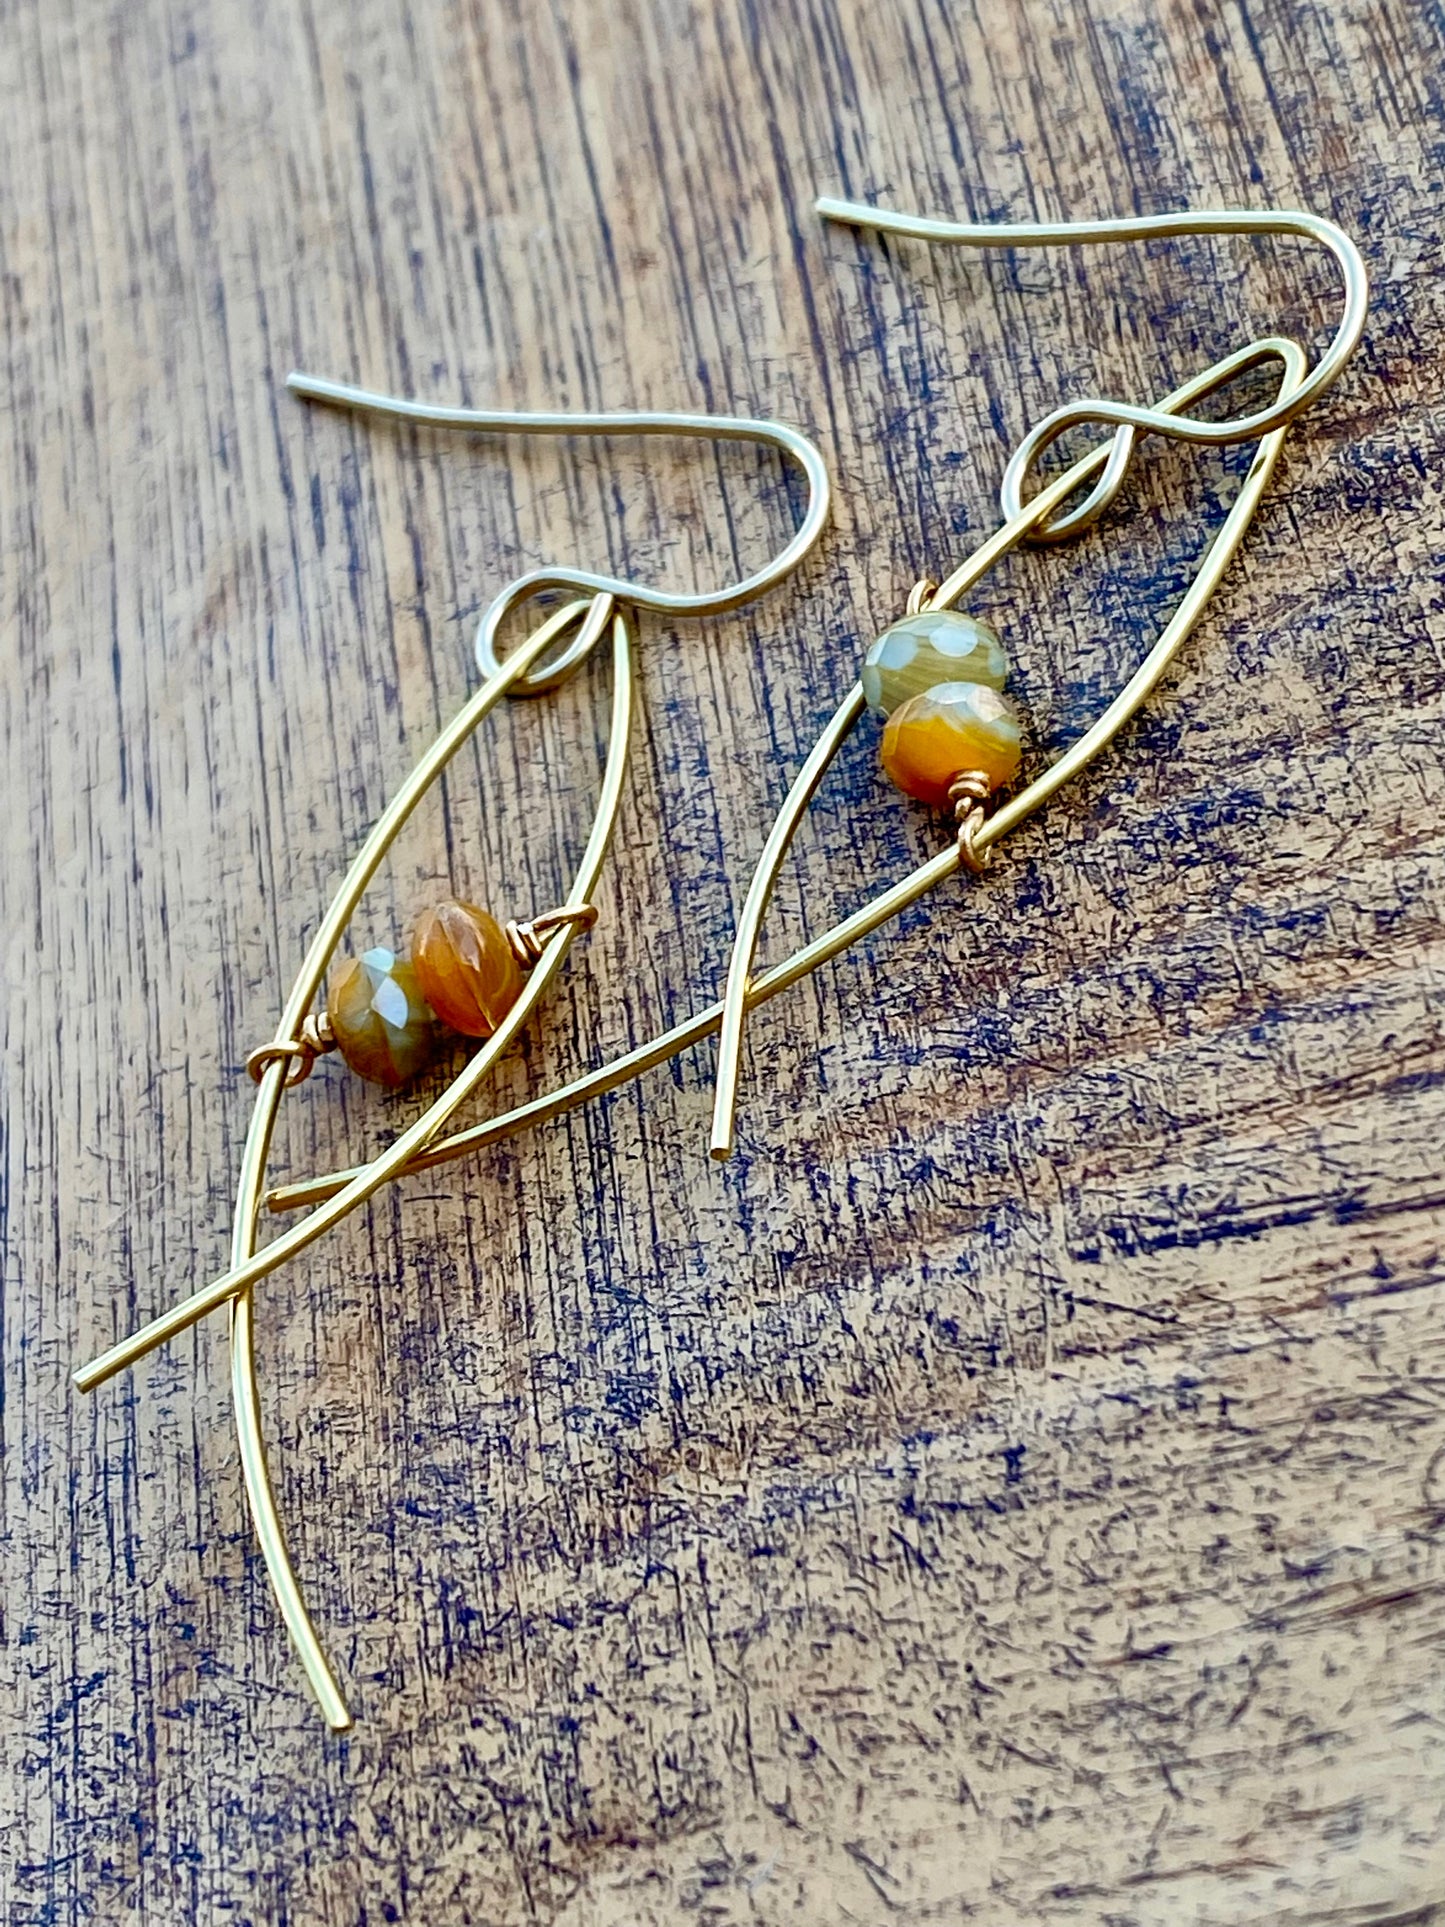 Earrings: Brass Dangles with and glass bead accent